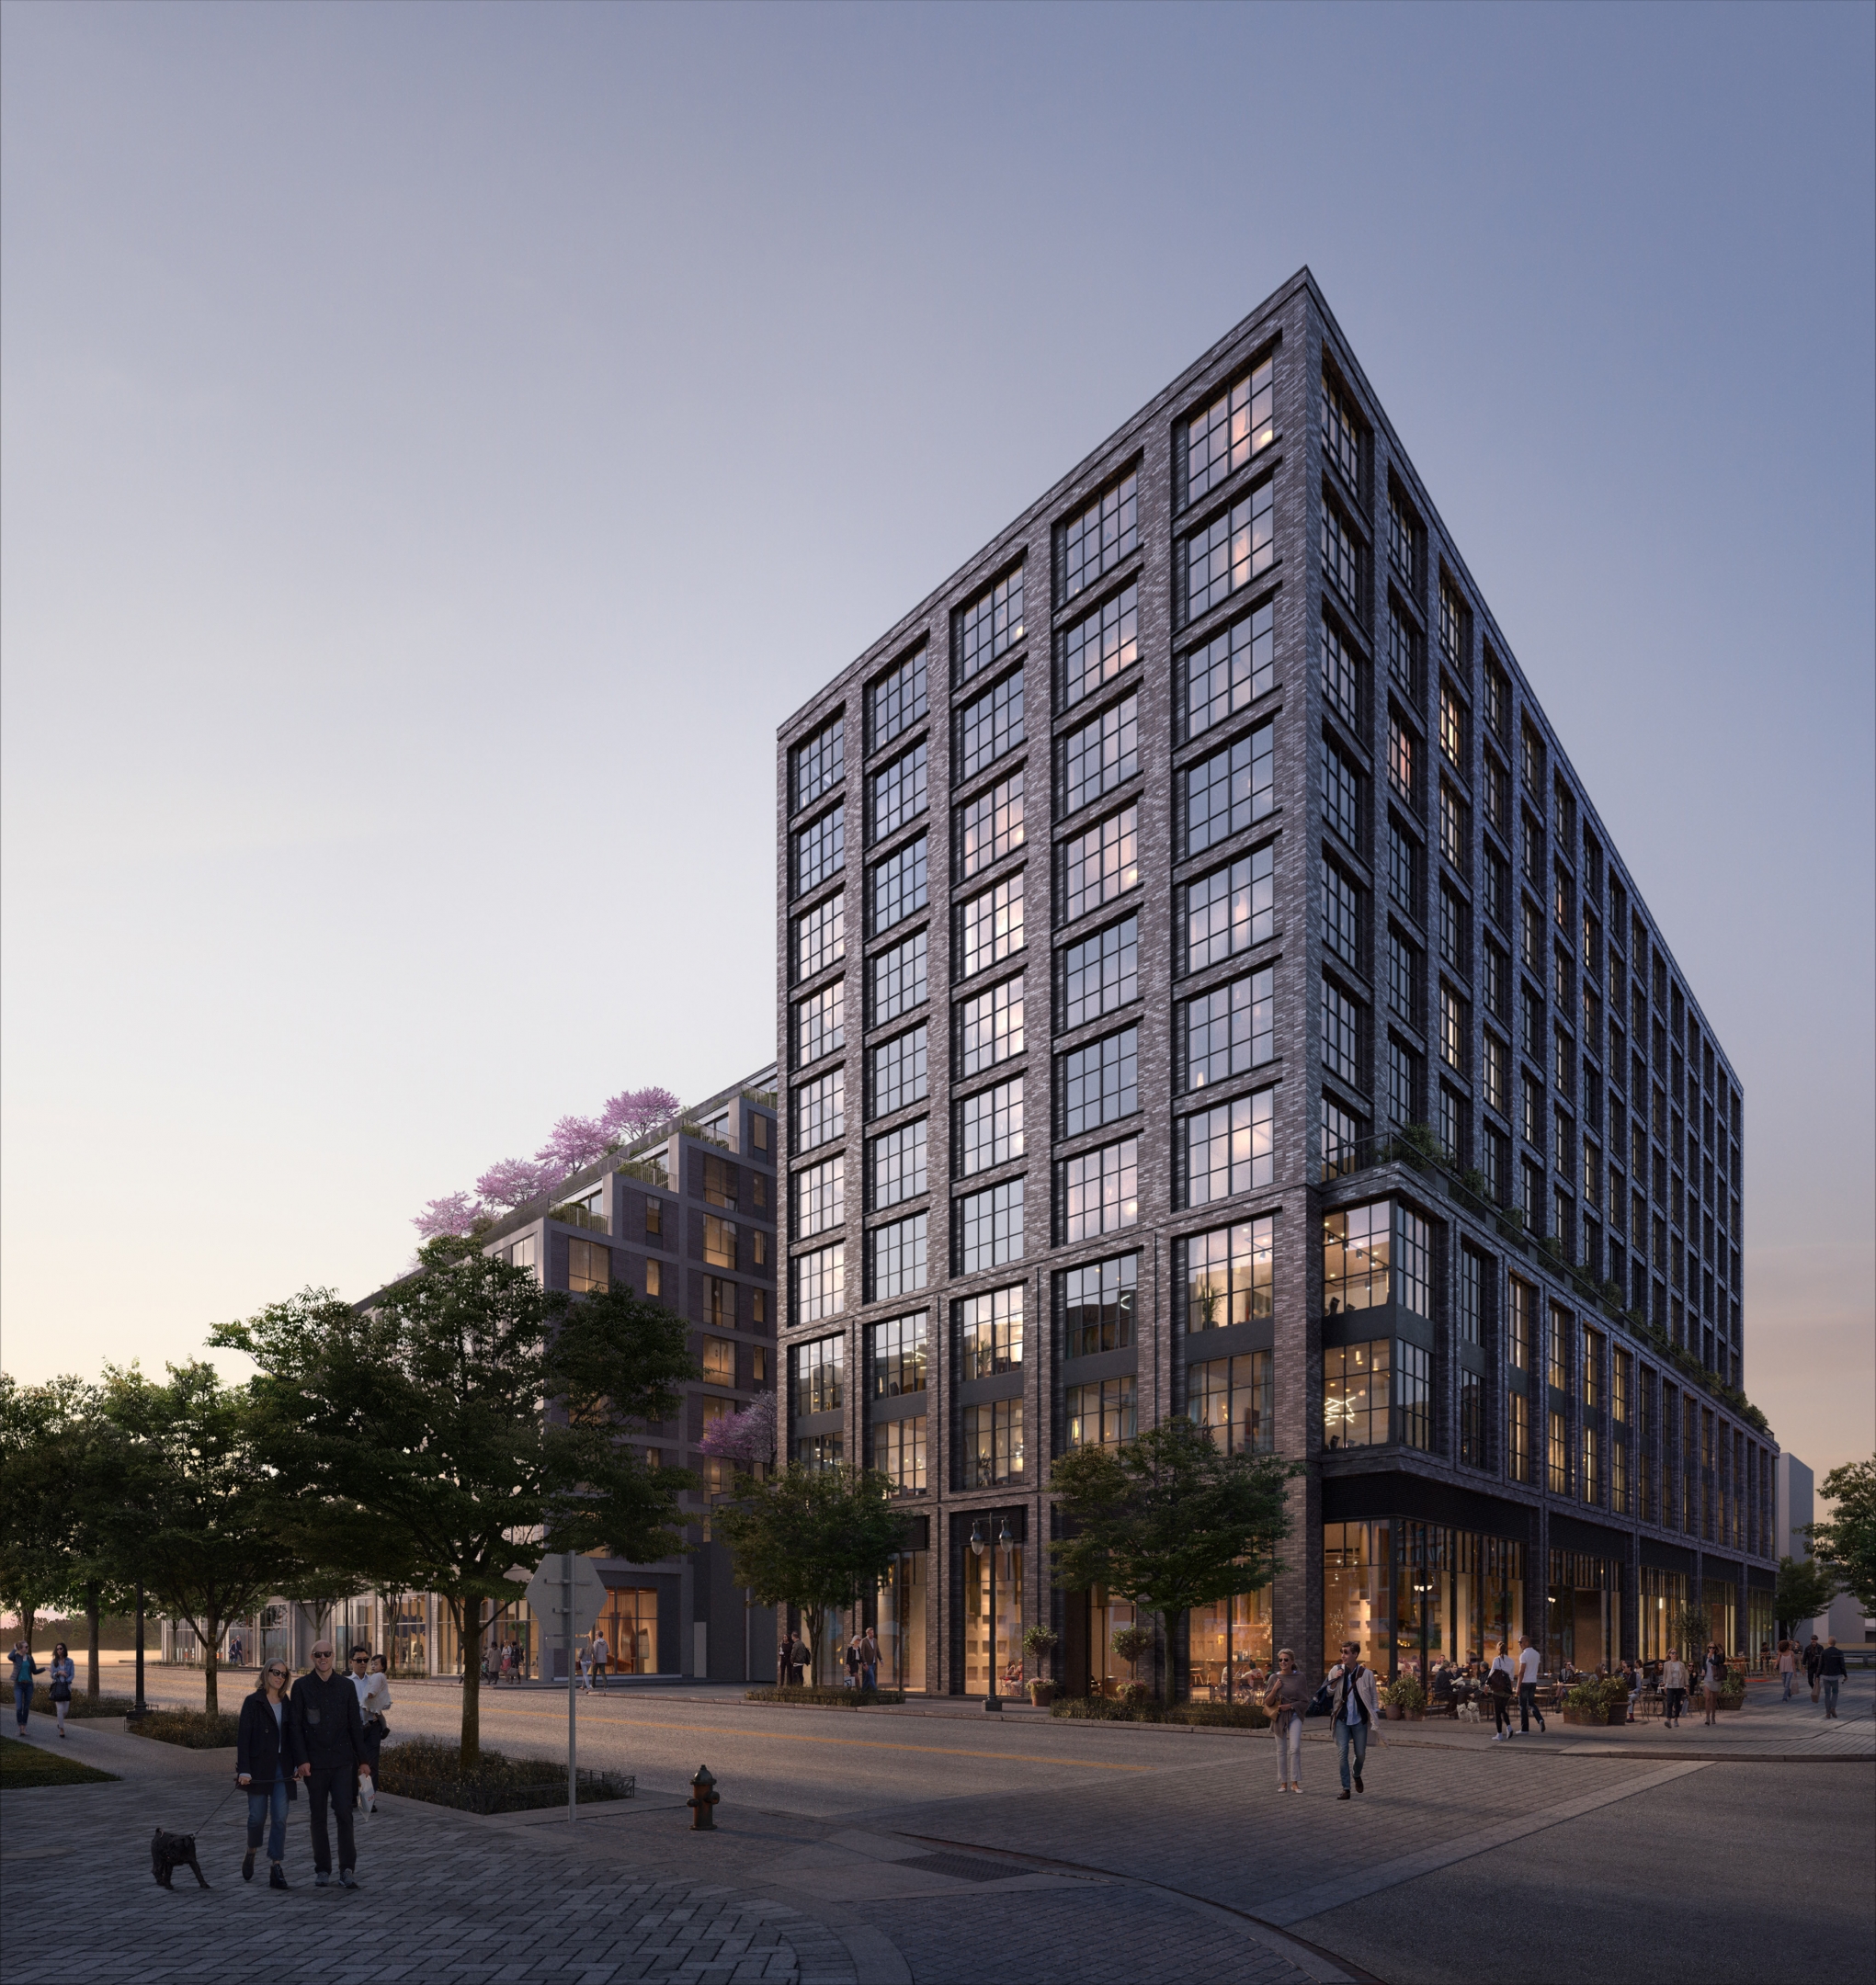 Architectural visualization of Parcel for Studios. A image of an office building from a street view at dusk.